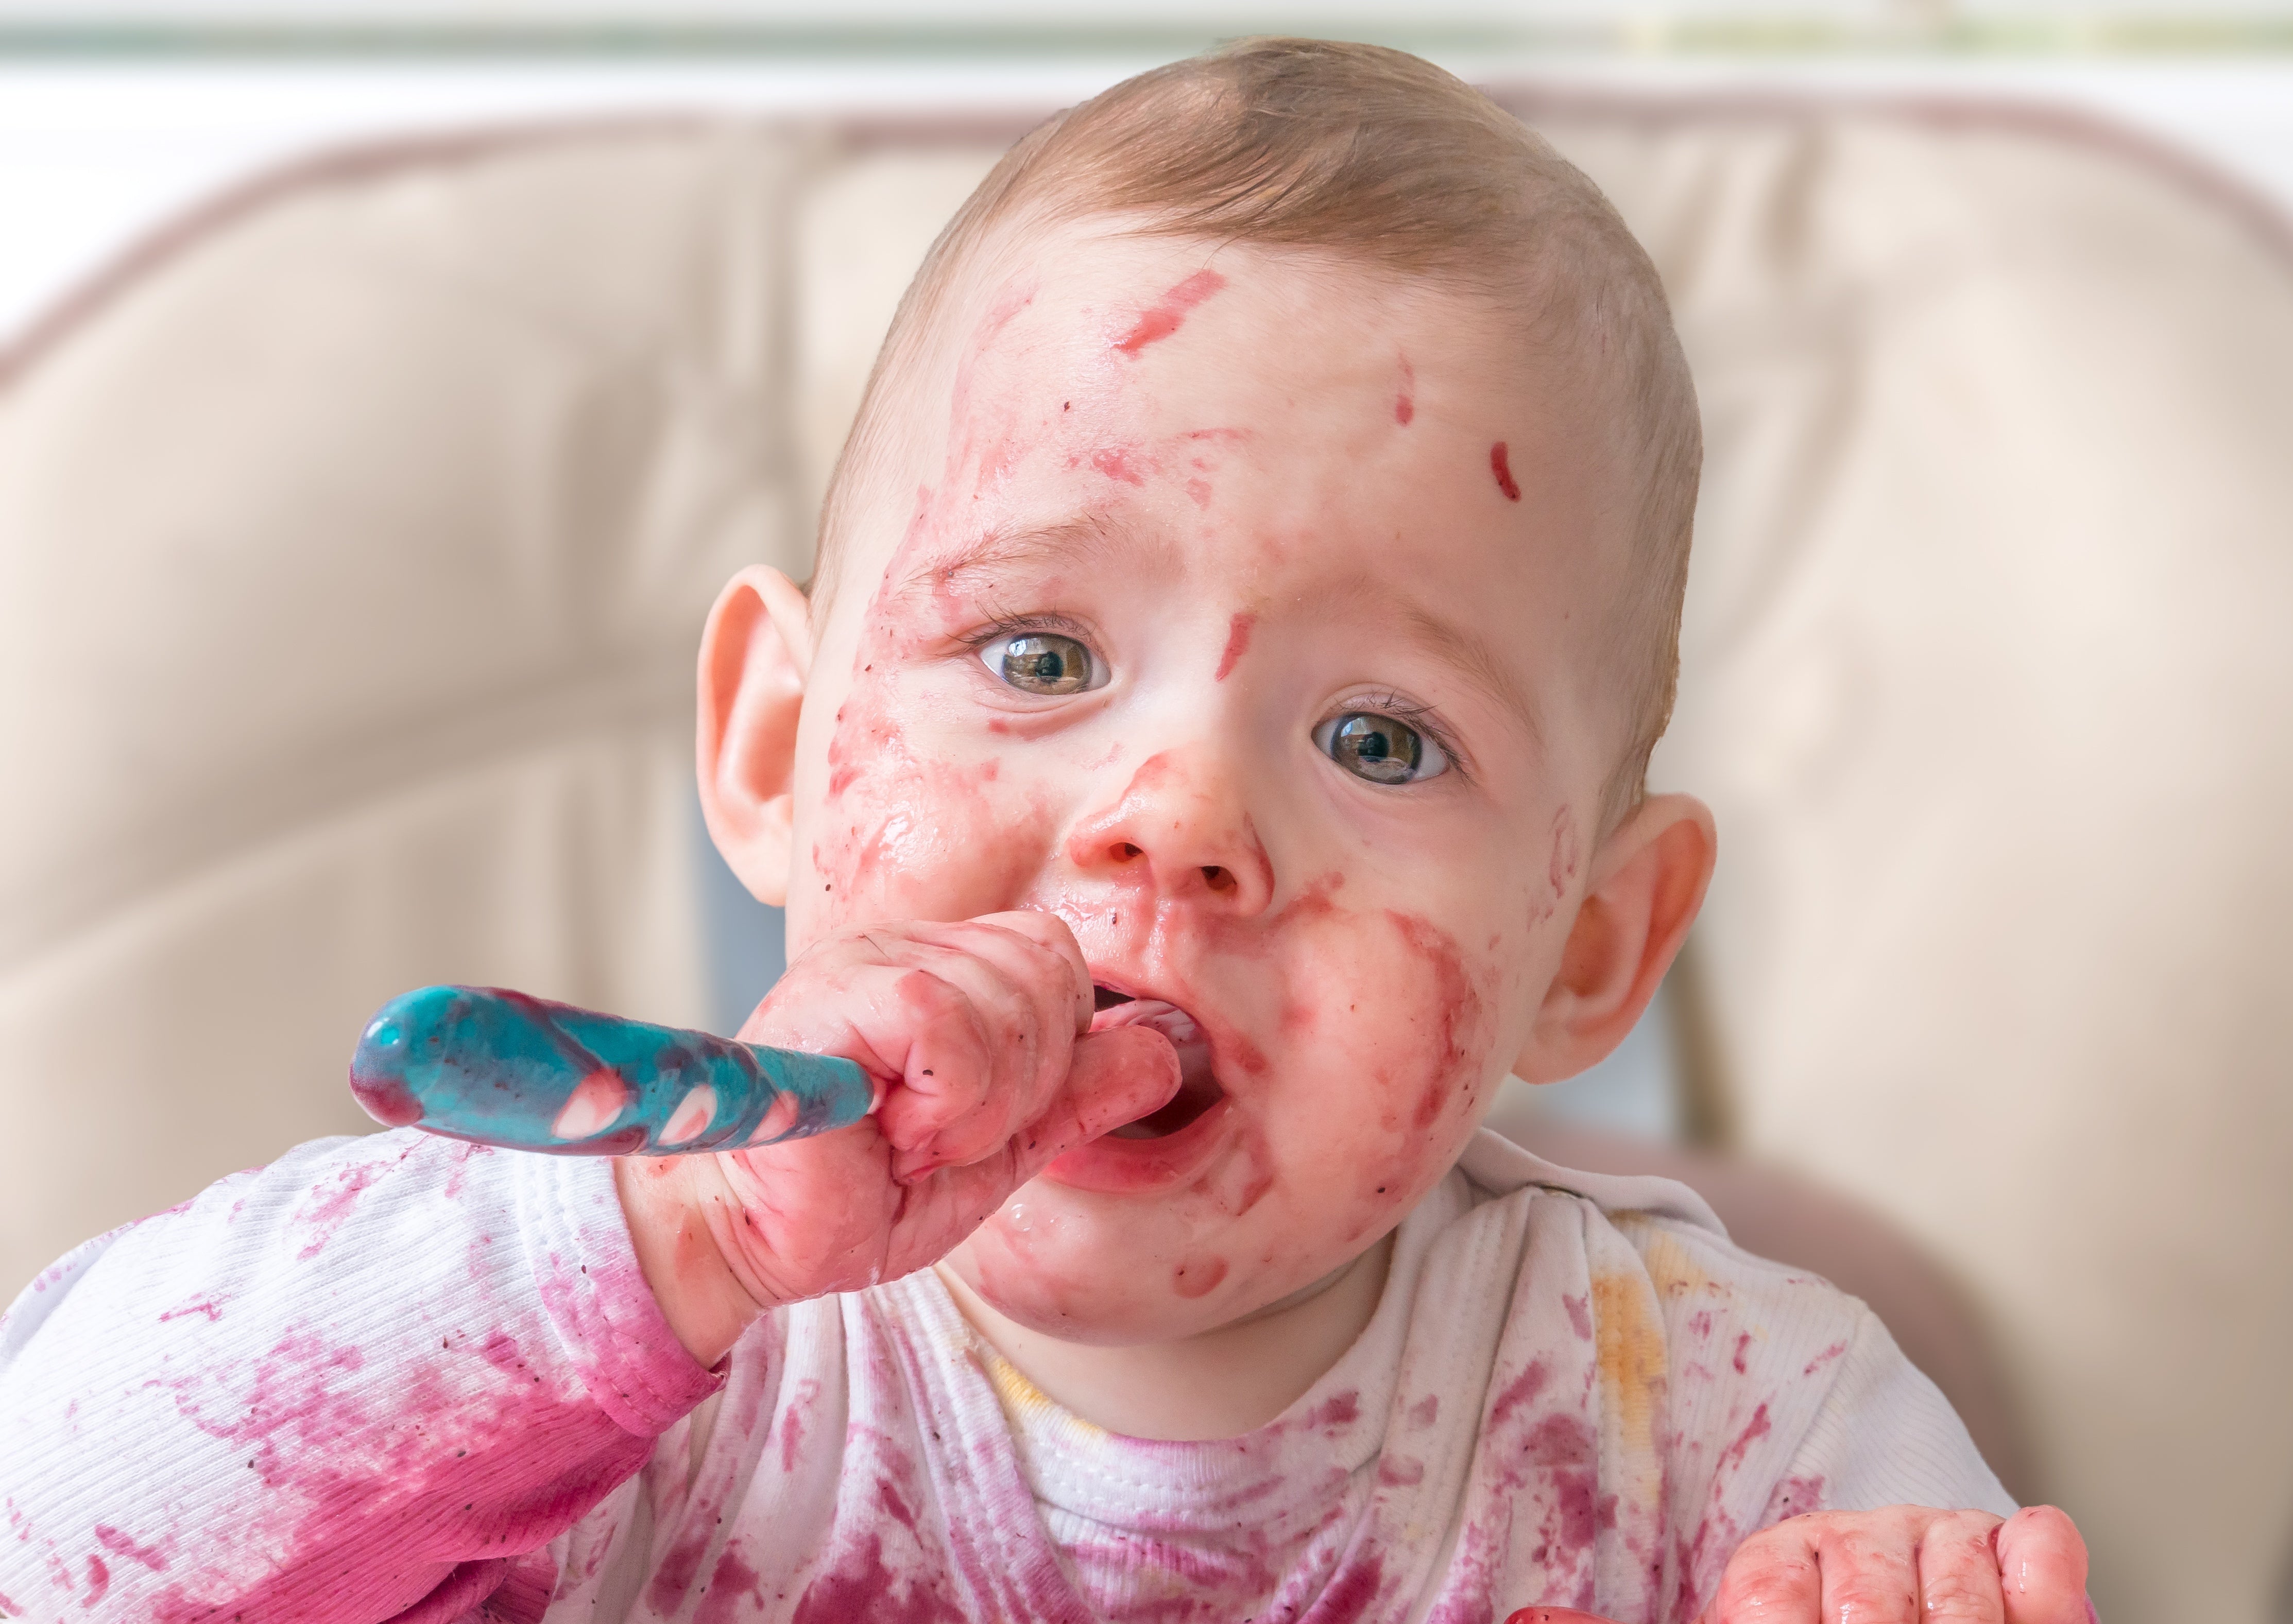 Why Eczema Increases Your Baby's Risk of Developing Food Allergies